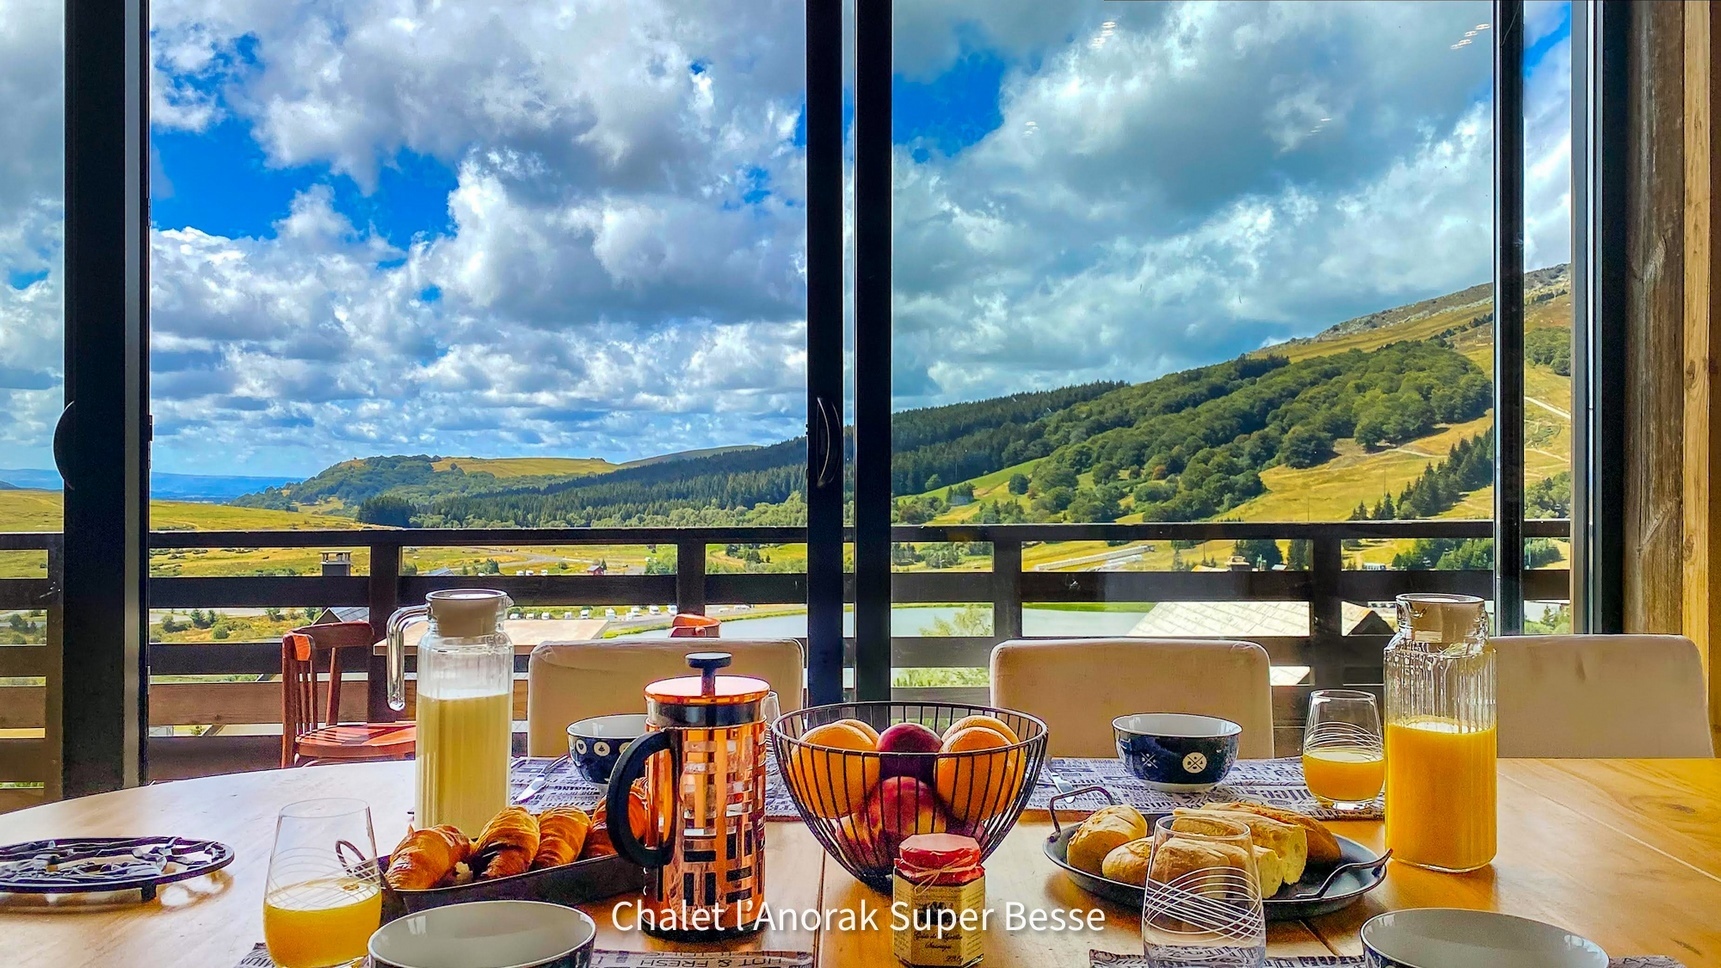 Chalet l'Anorak in Super Besse, breakfast with a view of Super Besse